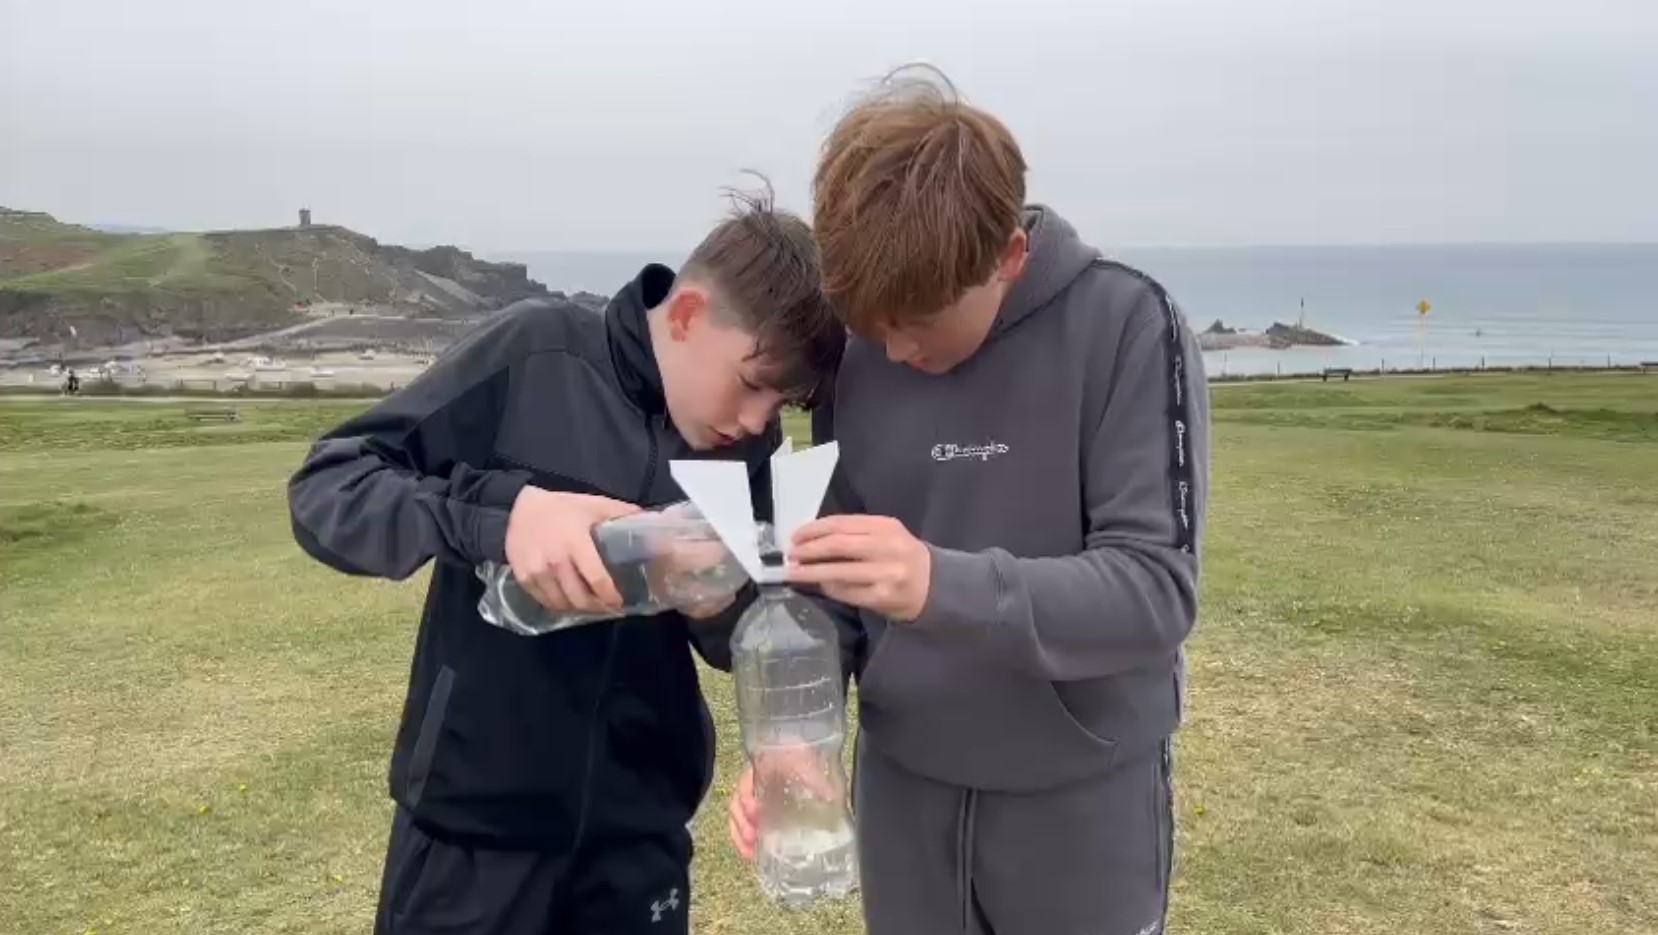 Oscar and Friend Filling Water Rocket by the sea